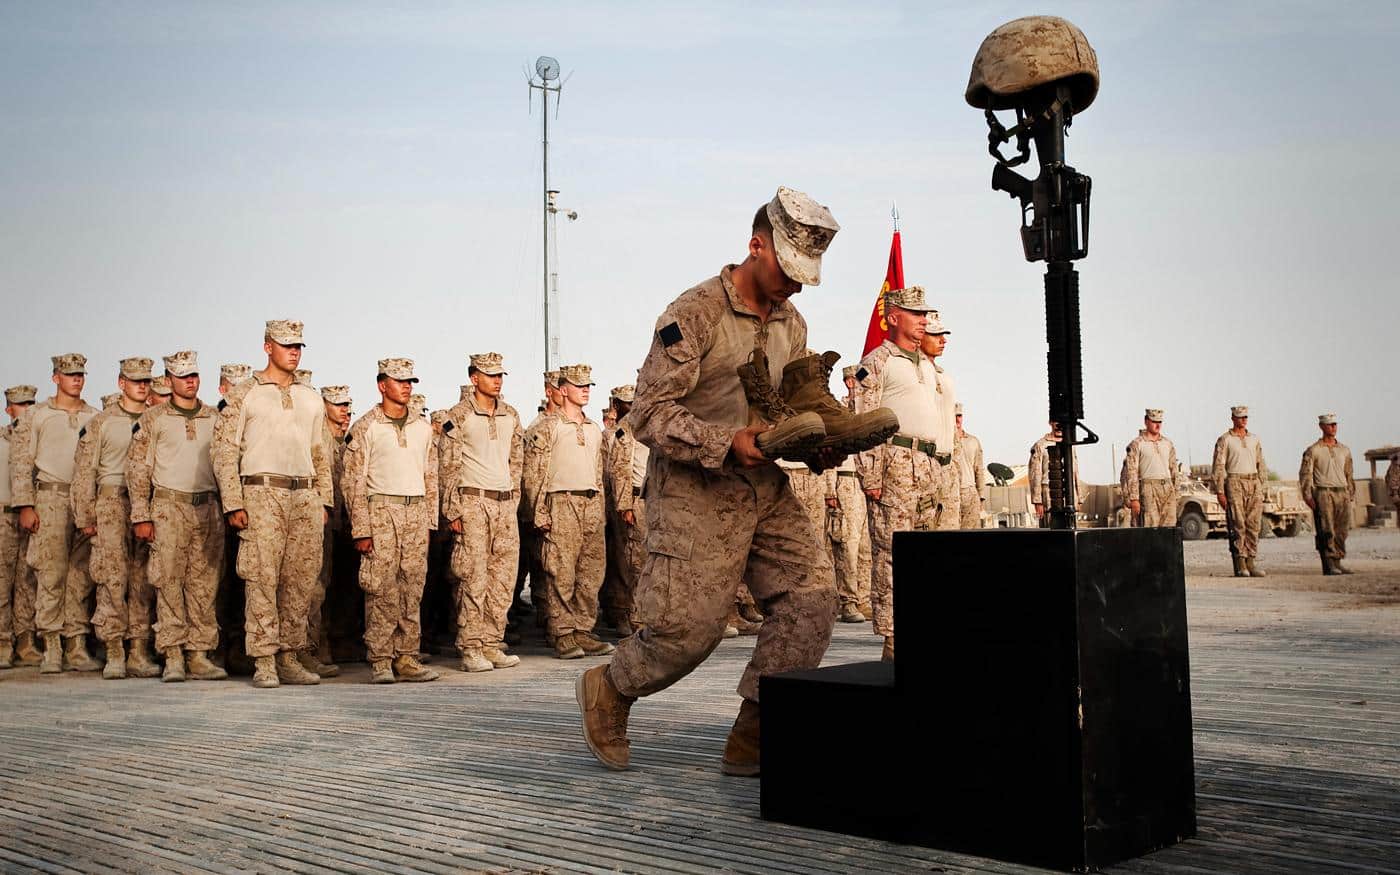 Lance Cpl. Joshua S. Leventhal, a grenadier with Kilo Company, 3rd Battalion, 3rd Marine Regiment, completes Sgt. Joe L. Wrightsman’s battlefield cross by placing boots and identification tags on the monument during a memorial service at Patrol Base Jaker, Afghanistan, July 30. Wrightsman died supporting combat operations July 18.